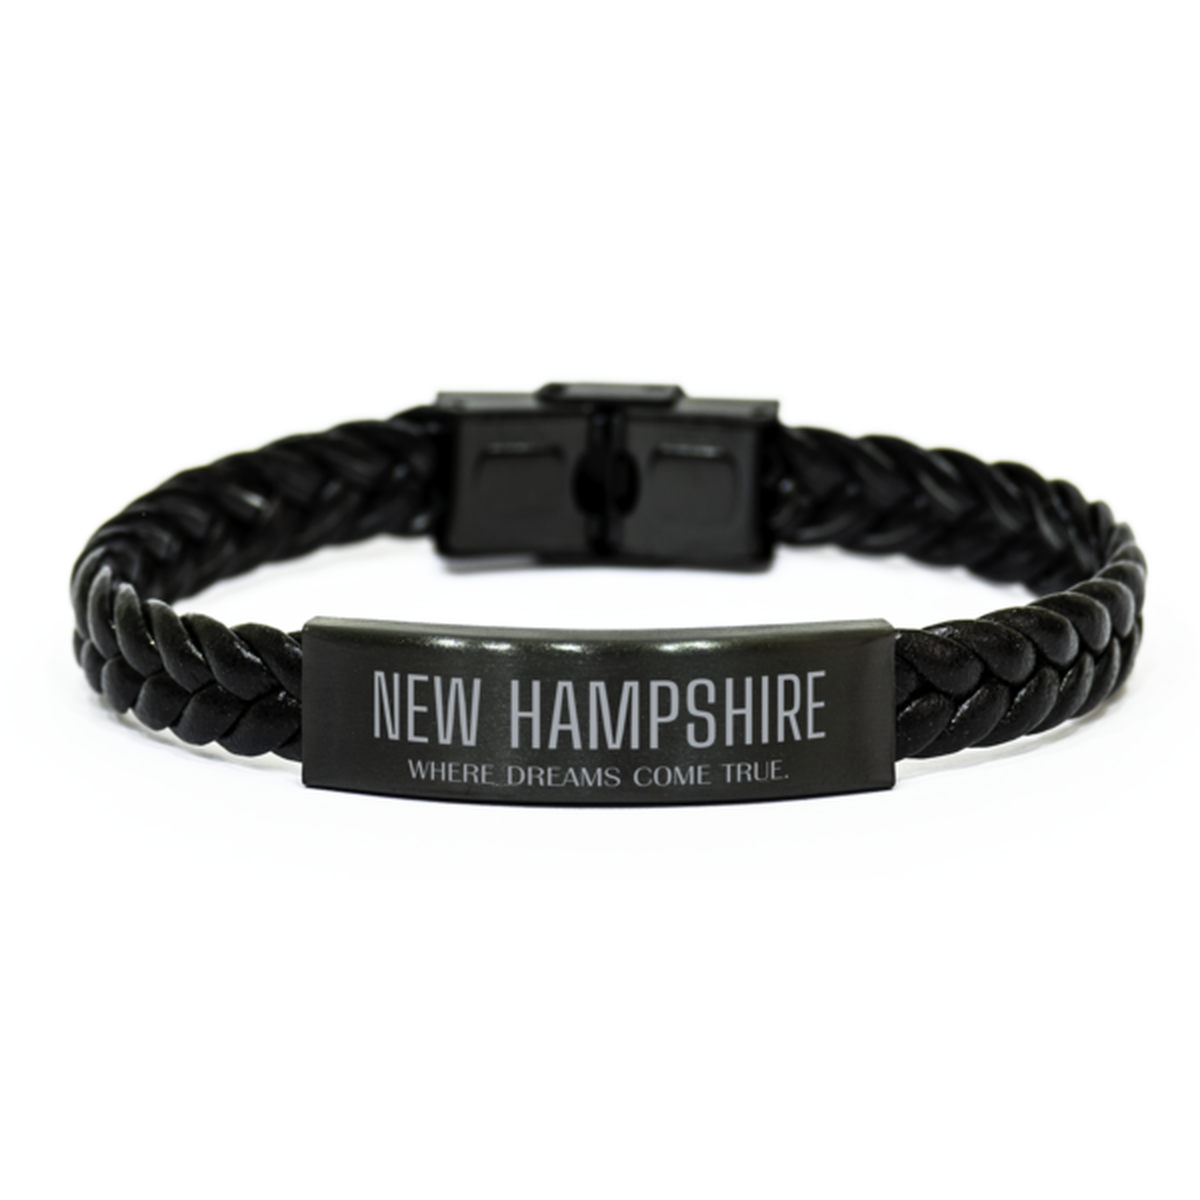 Love New Hampshire State Braided Leather Bracelet, New Hampshire Where dreams come true, Birthday Inspirational Gifts For New Hampshire Men, Women, Friends